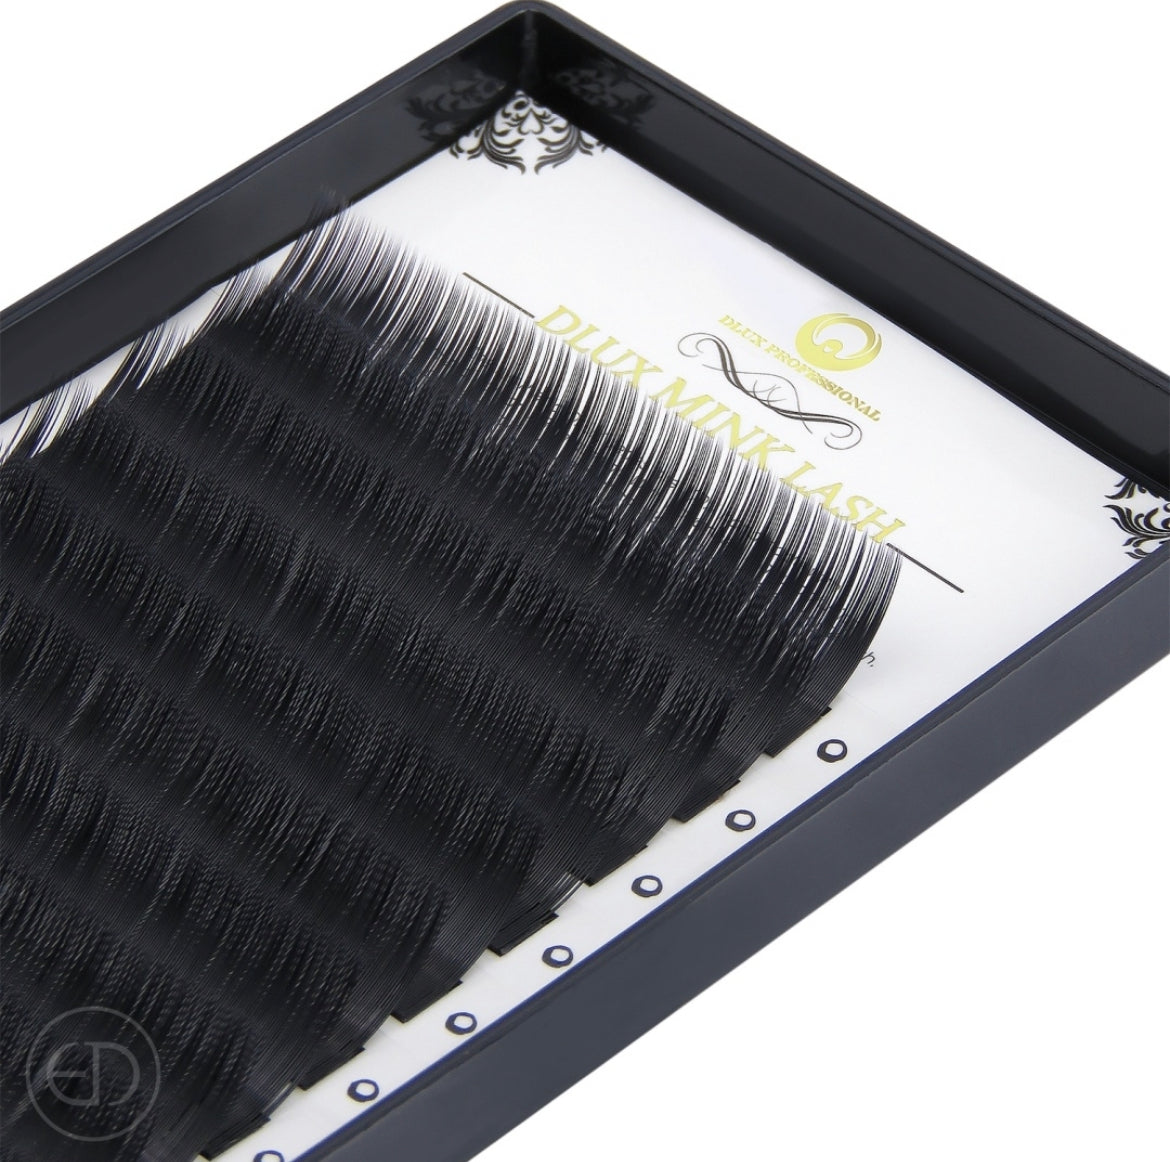 Lash Extensions Supply Online